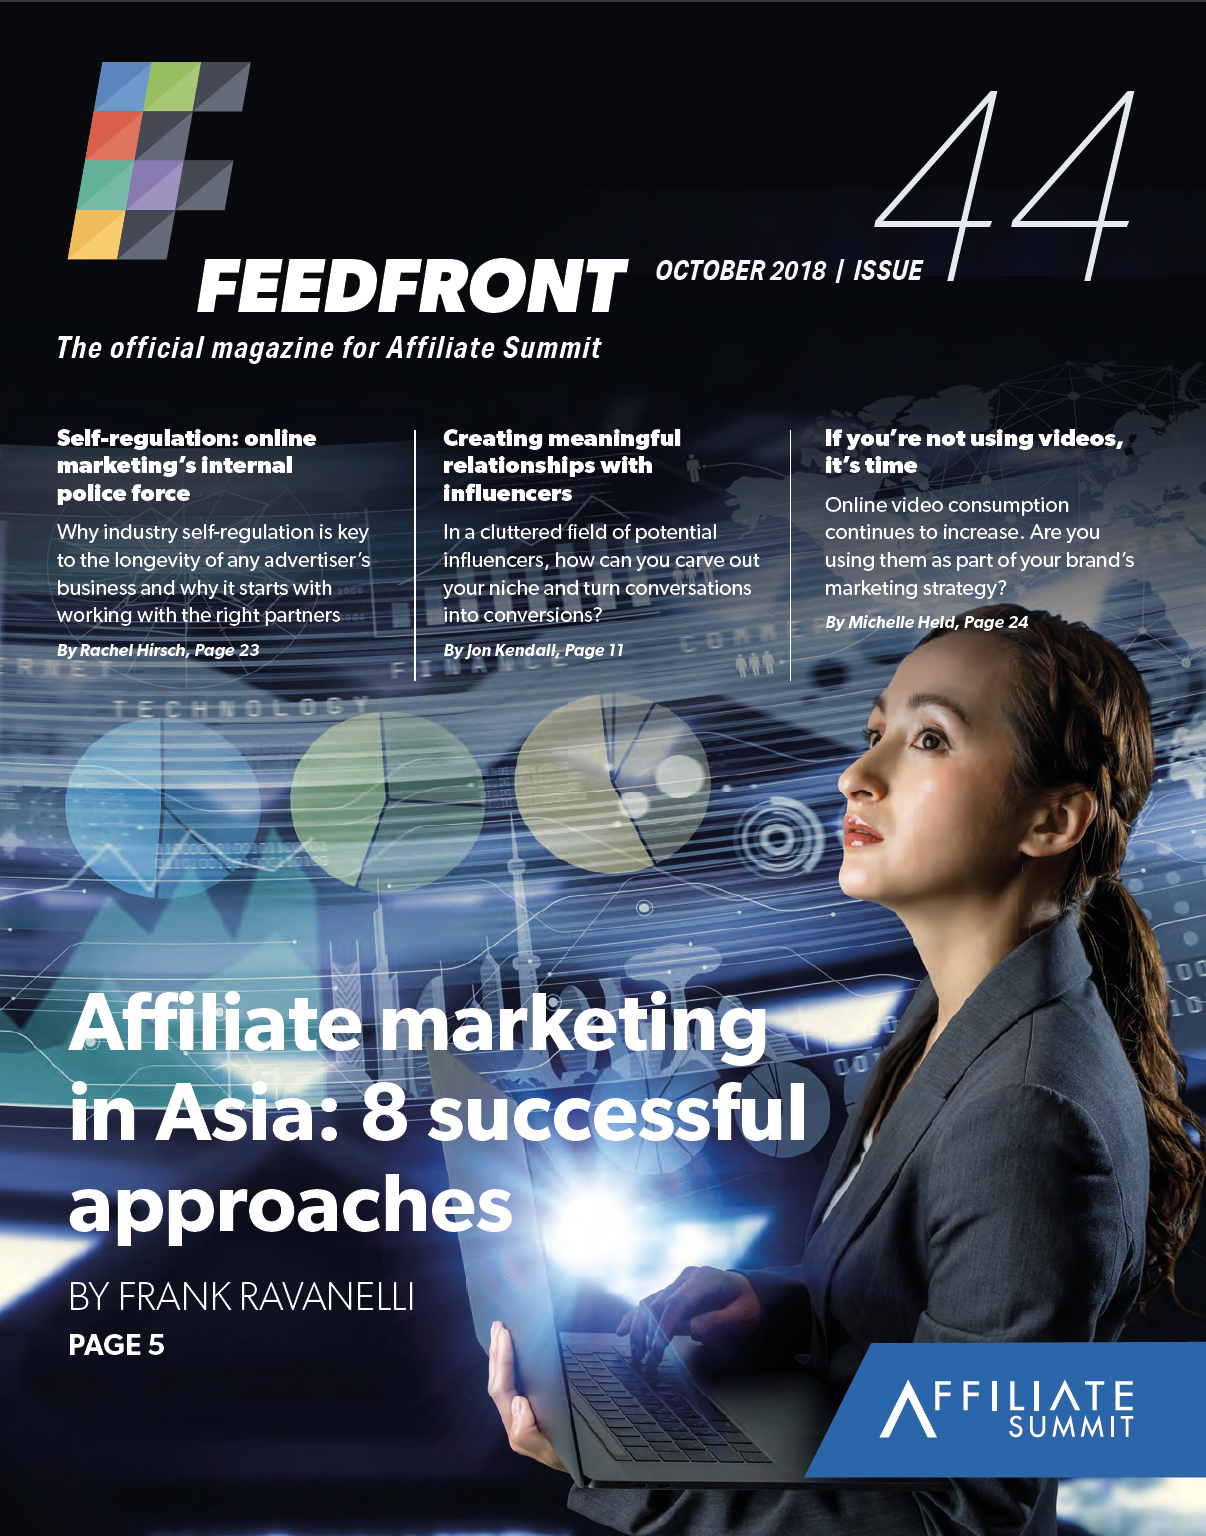 FeedFront Magazine article on increasing conversions for cross-border payments